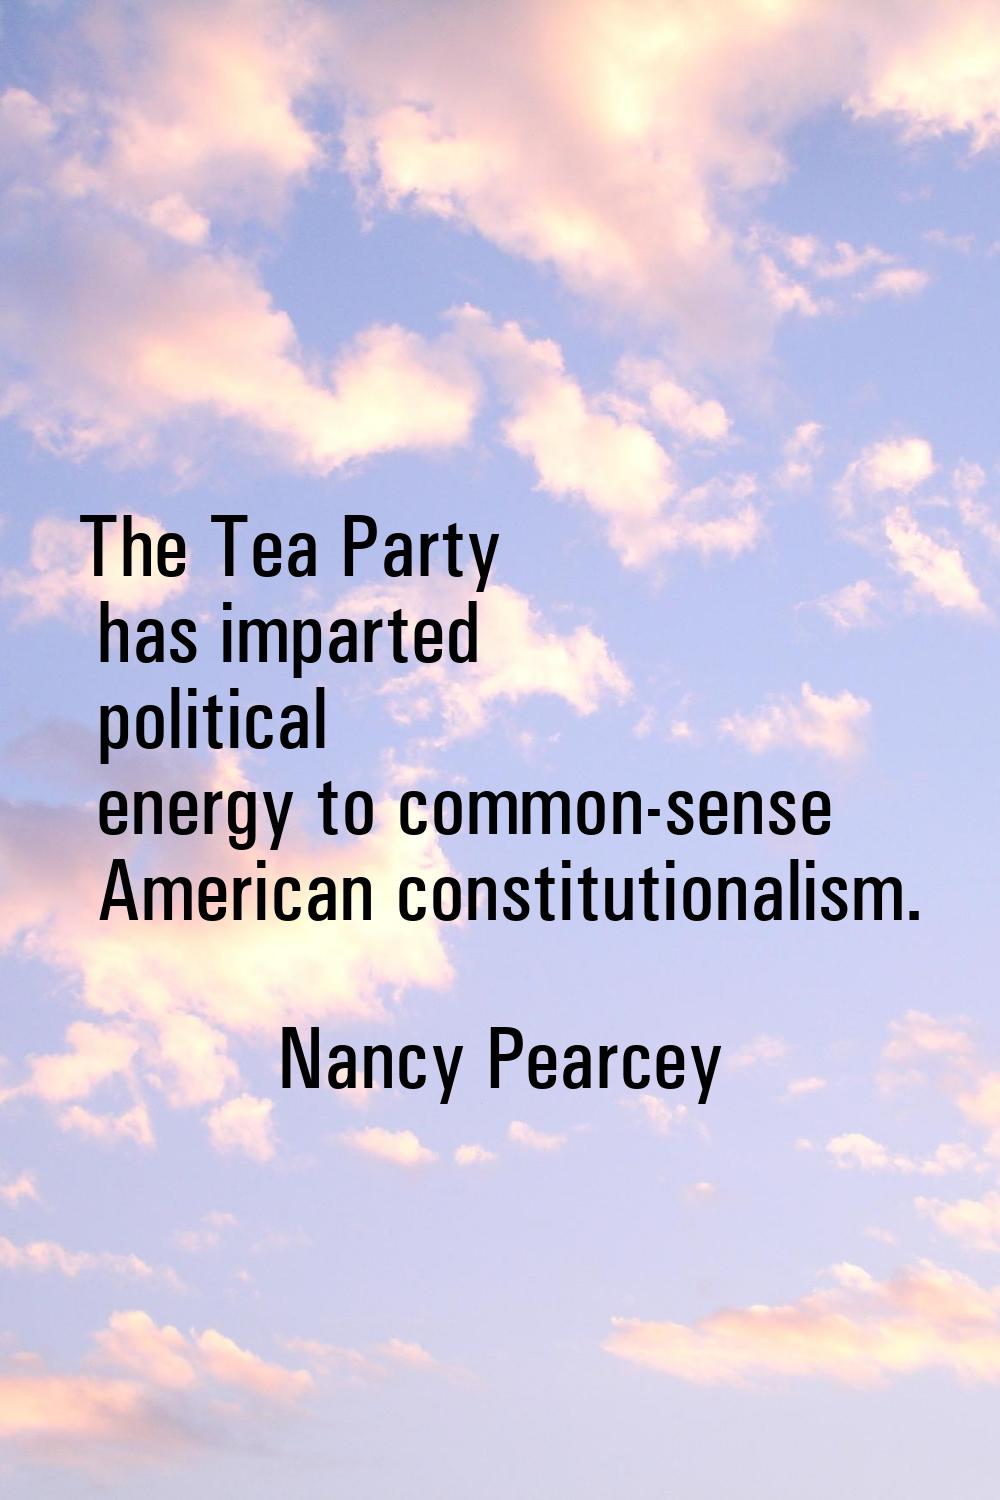 The Tea Party has imparted political energy to common-sense American constitutionalism.